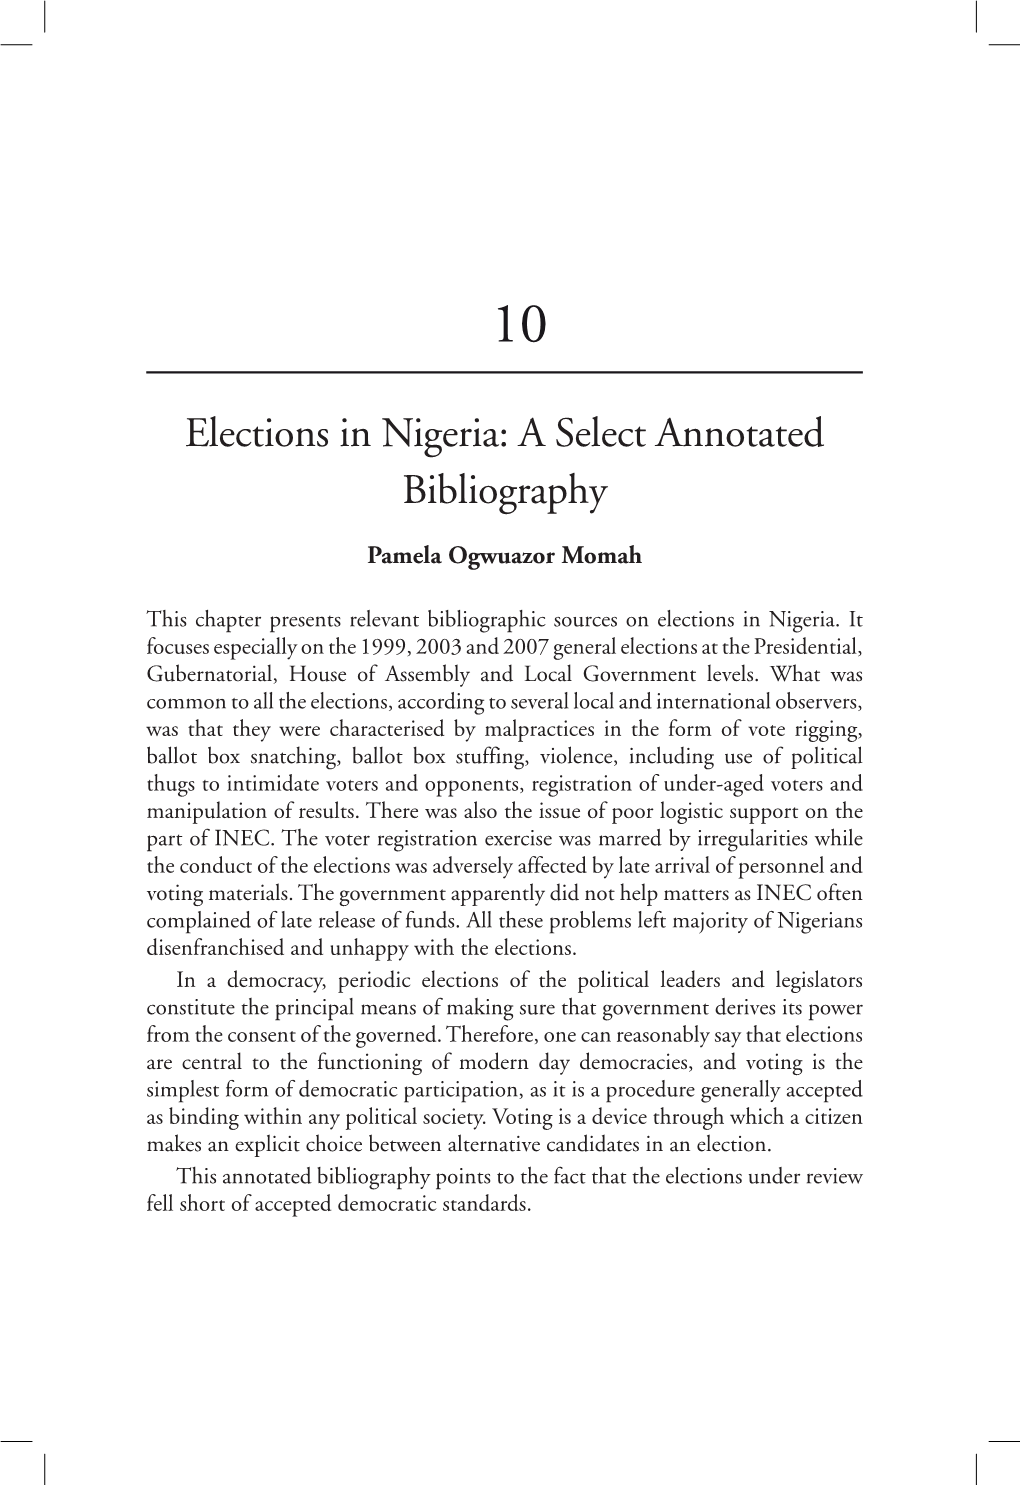 Elections in Nigeria: a Select Annotated Bibliography